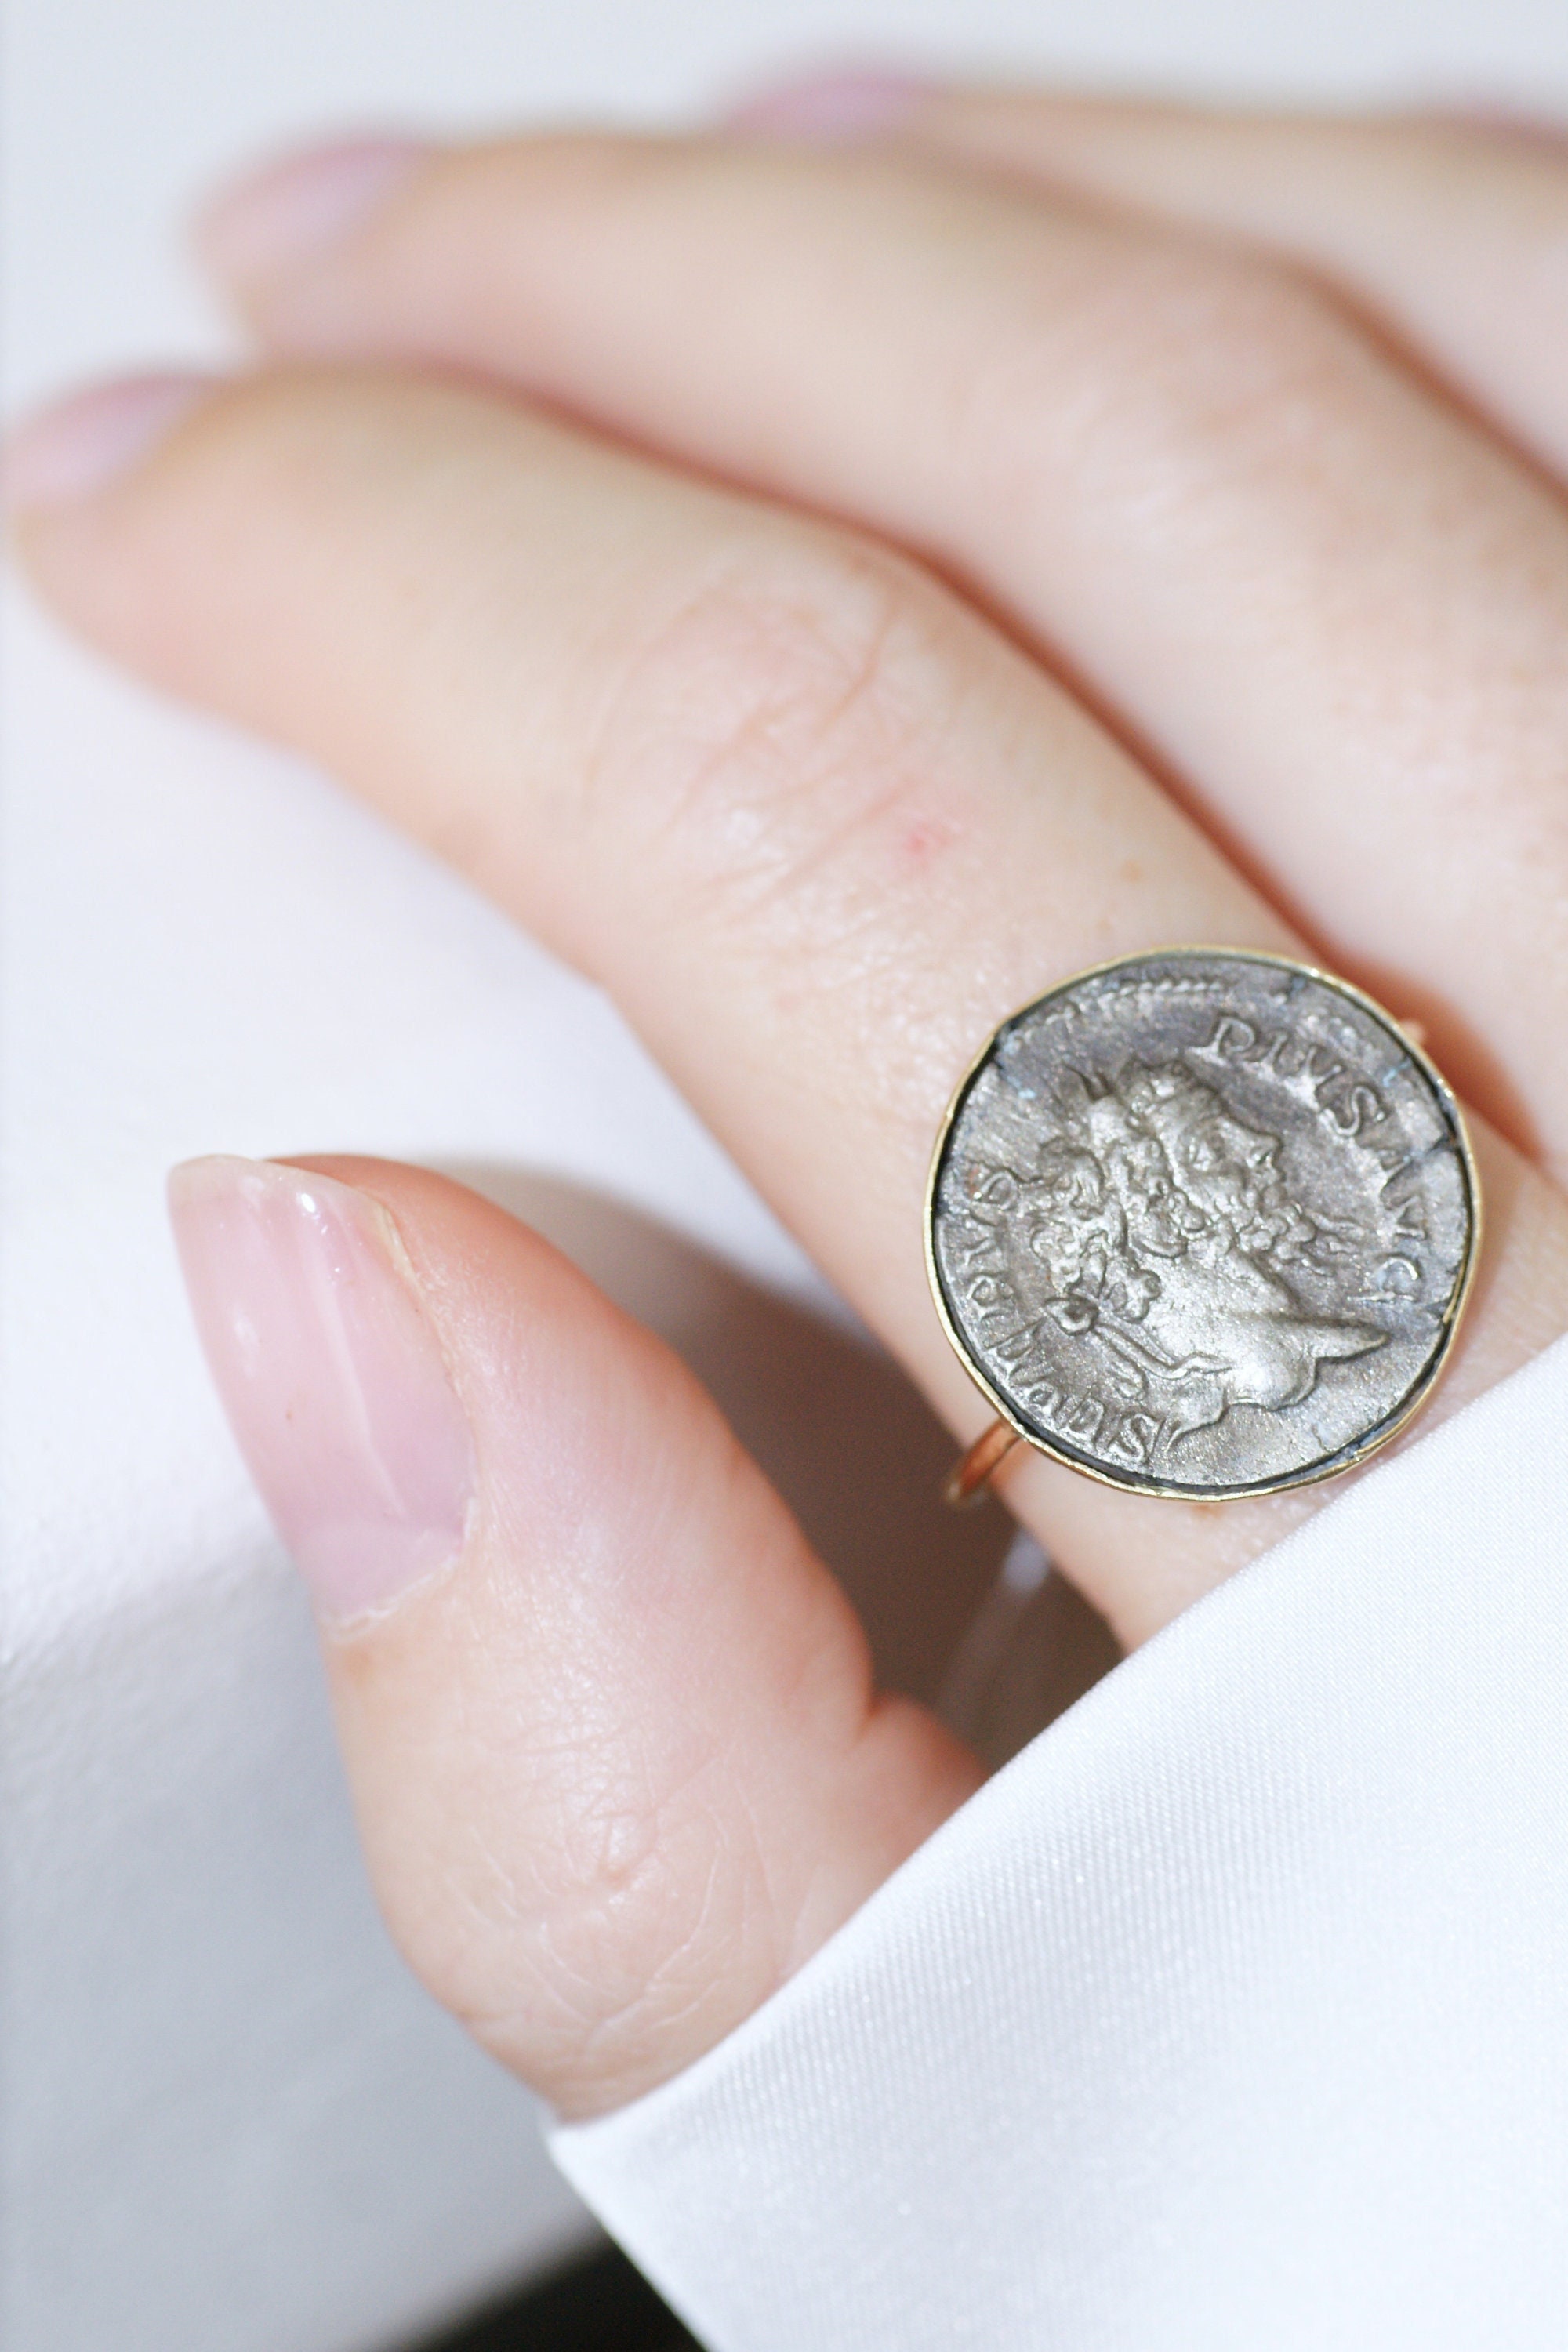 Morgan Silver Dollar Coin Ring - The Original! | Hand-crafted coin rings by  CoinCrafters®